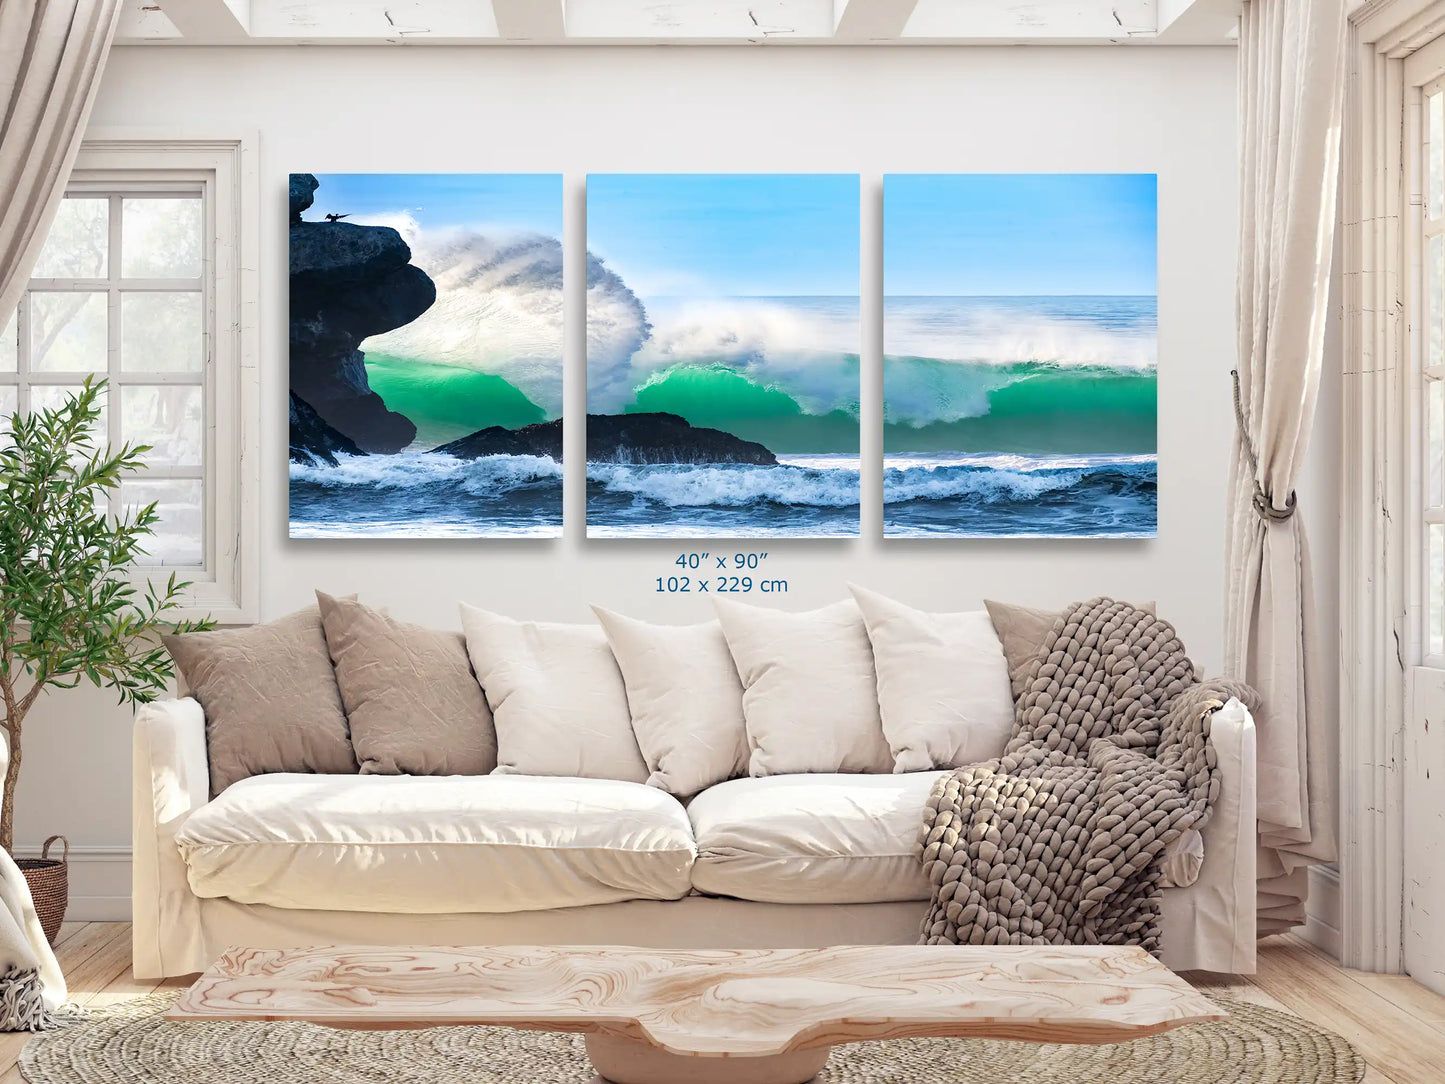 A 40"x90" expansive wall art piece capturing the grandeur of Morro Rock's ocean waves, dominating the living room's visual space.